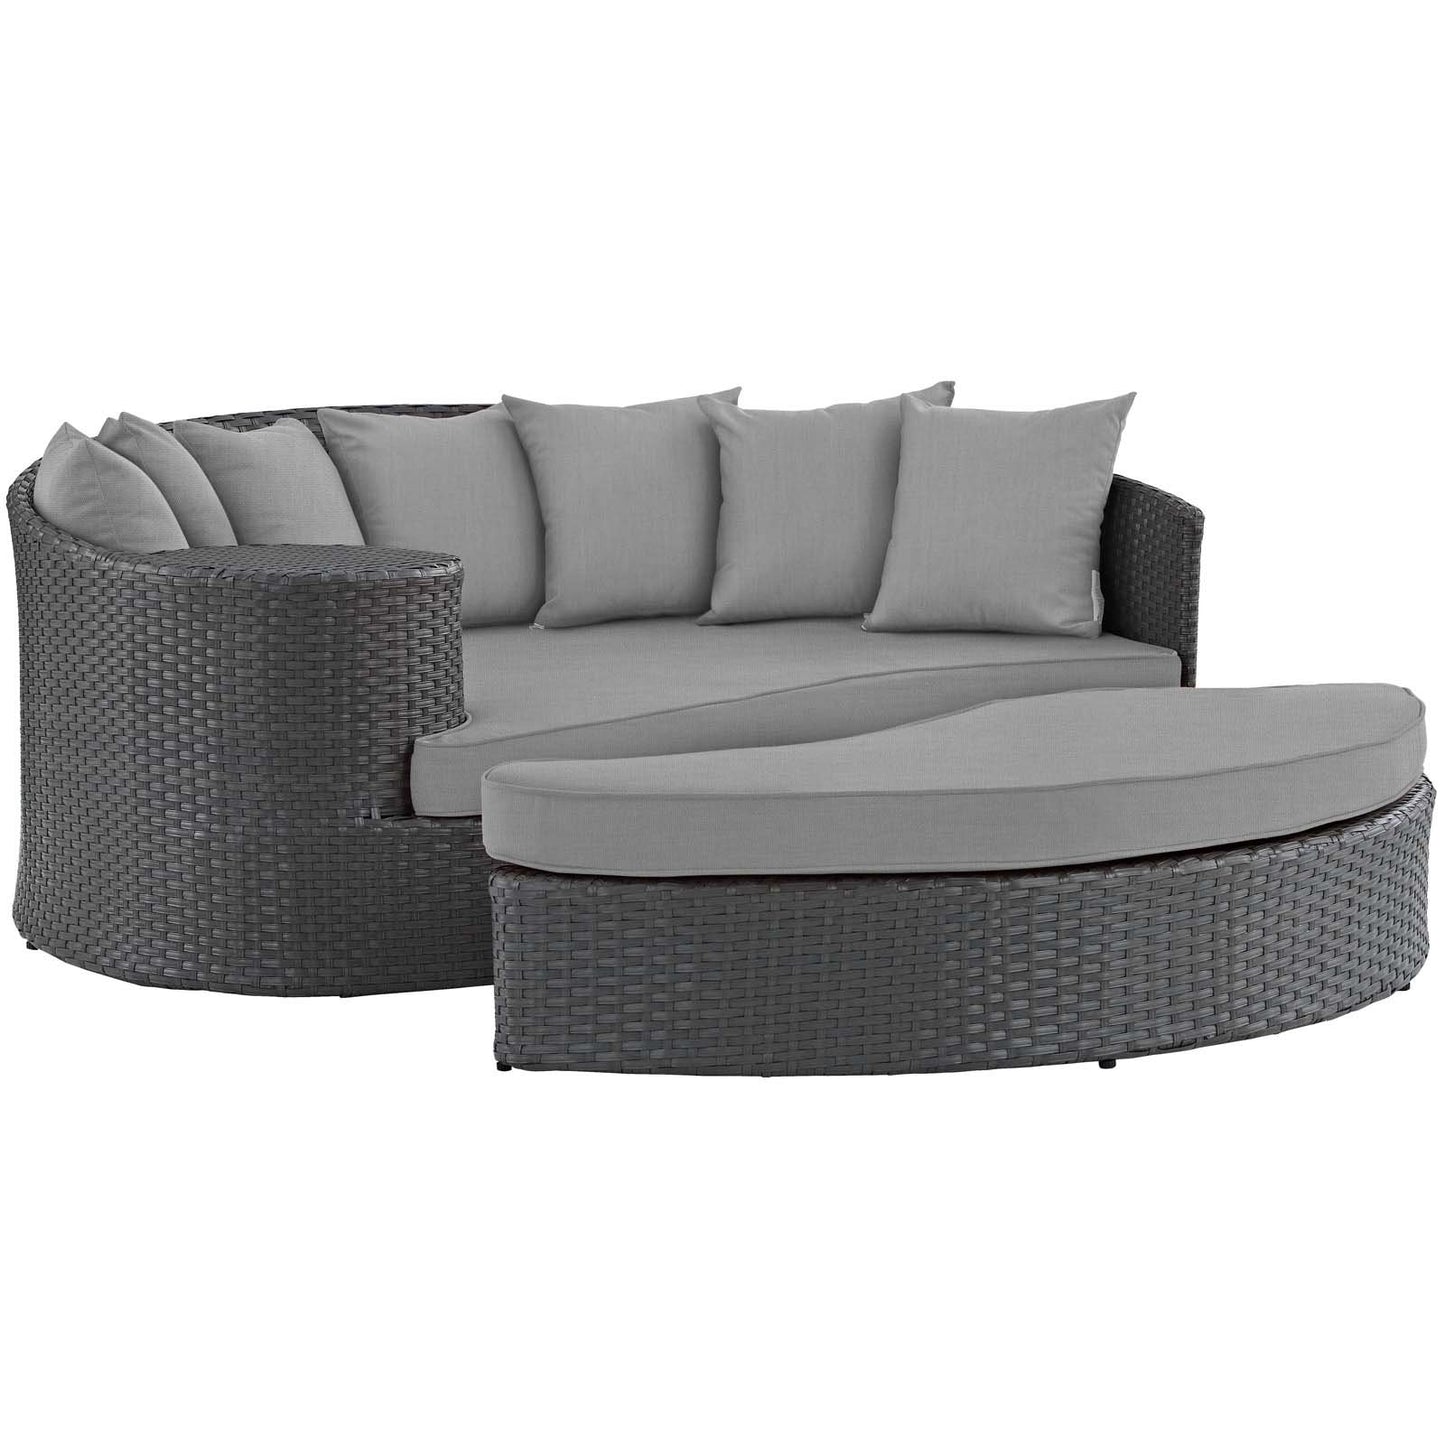 Modway Sojourn Outdoor Wicker Daybed, Sunbrella Fabric, Gray